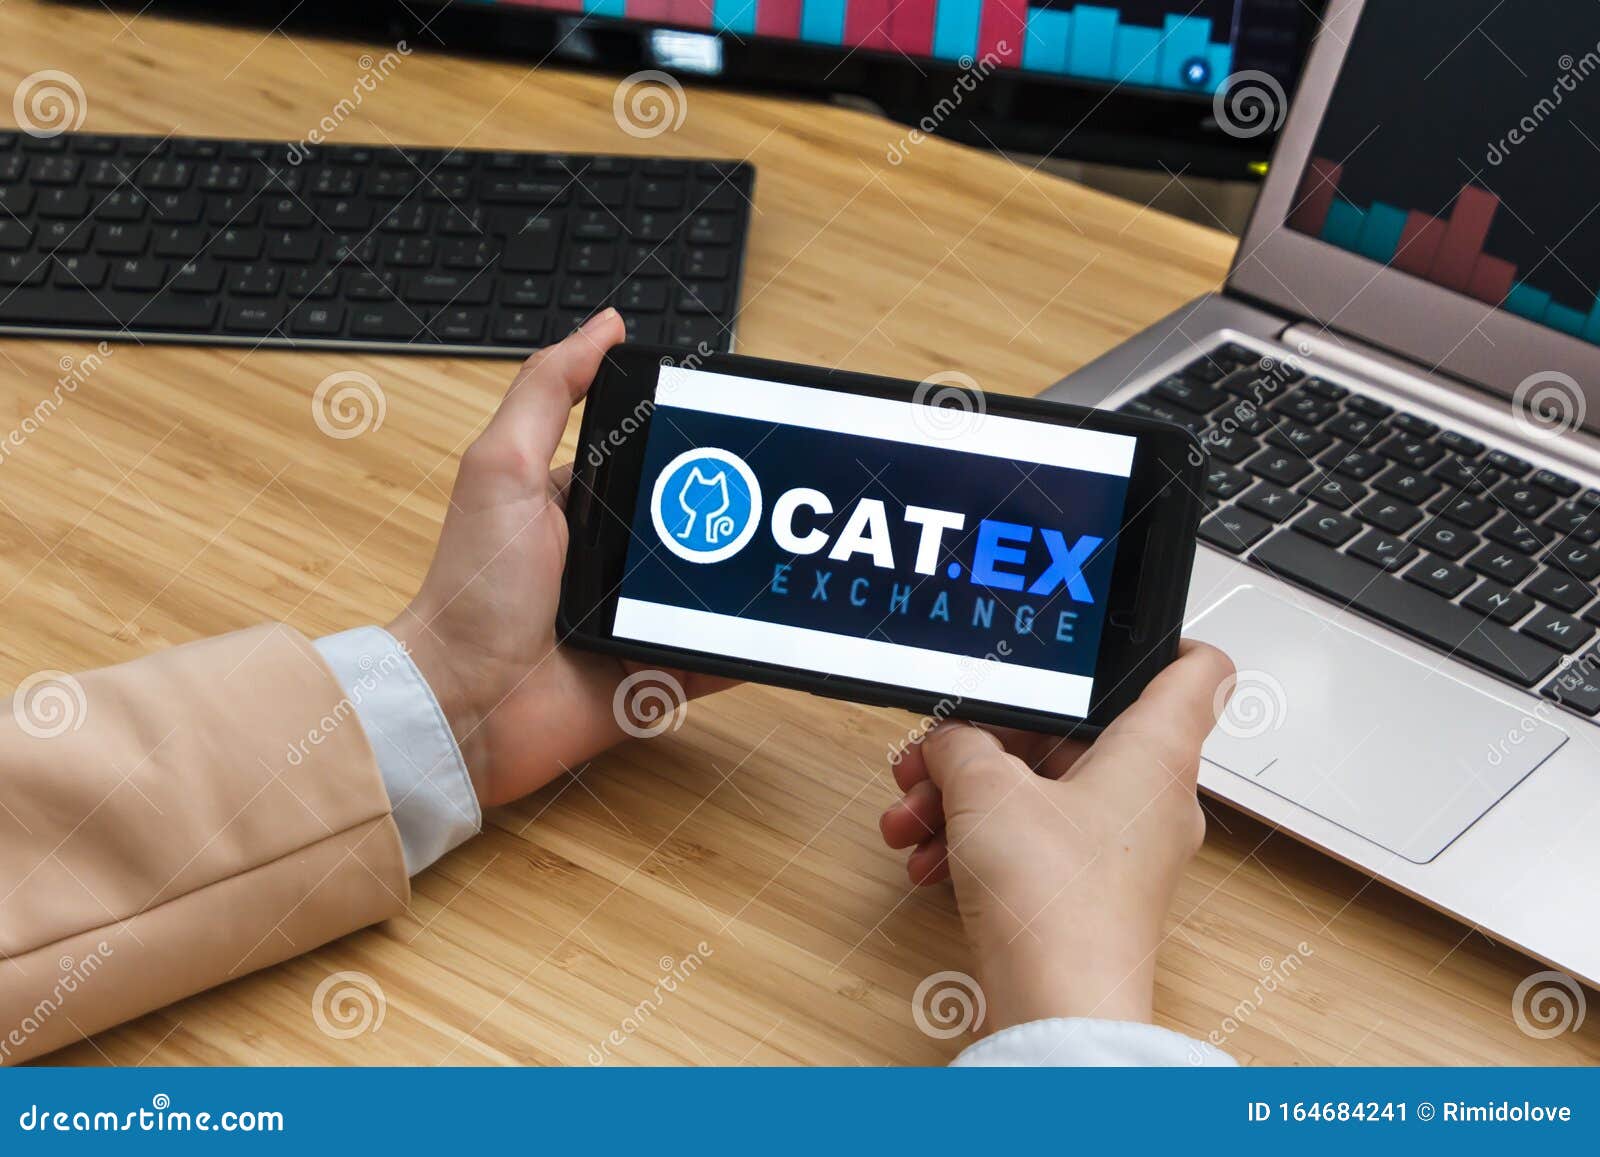 cat cryptocurrency automatic trader download